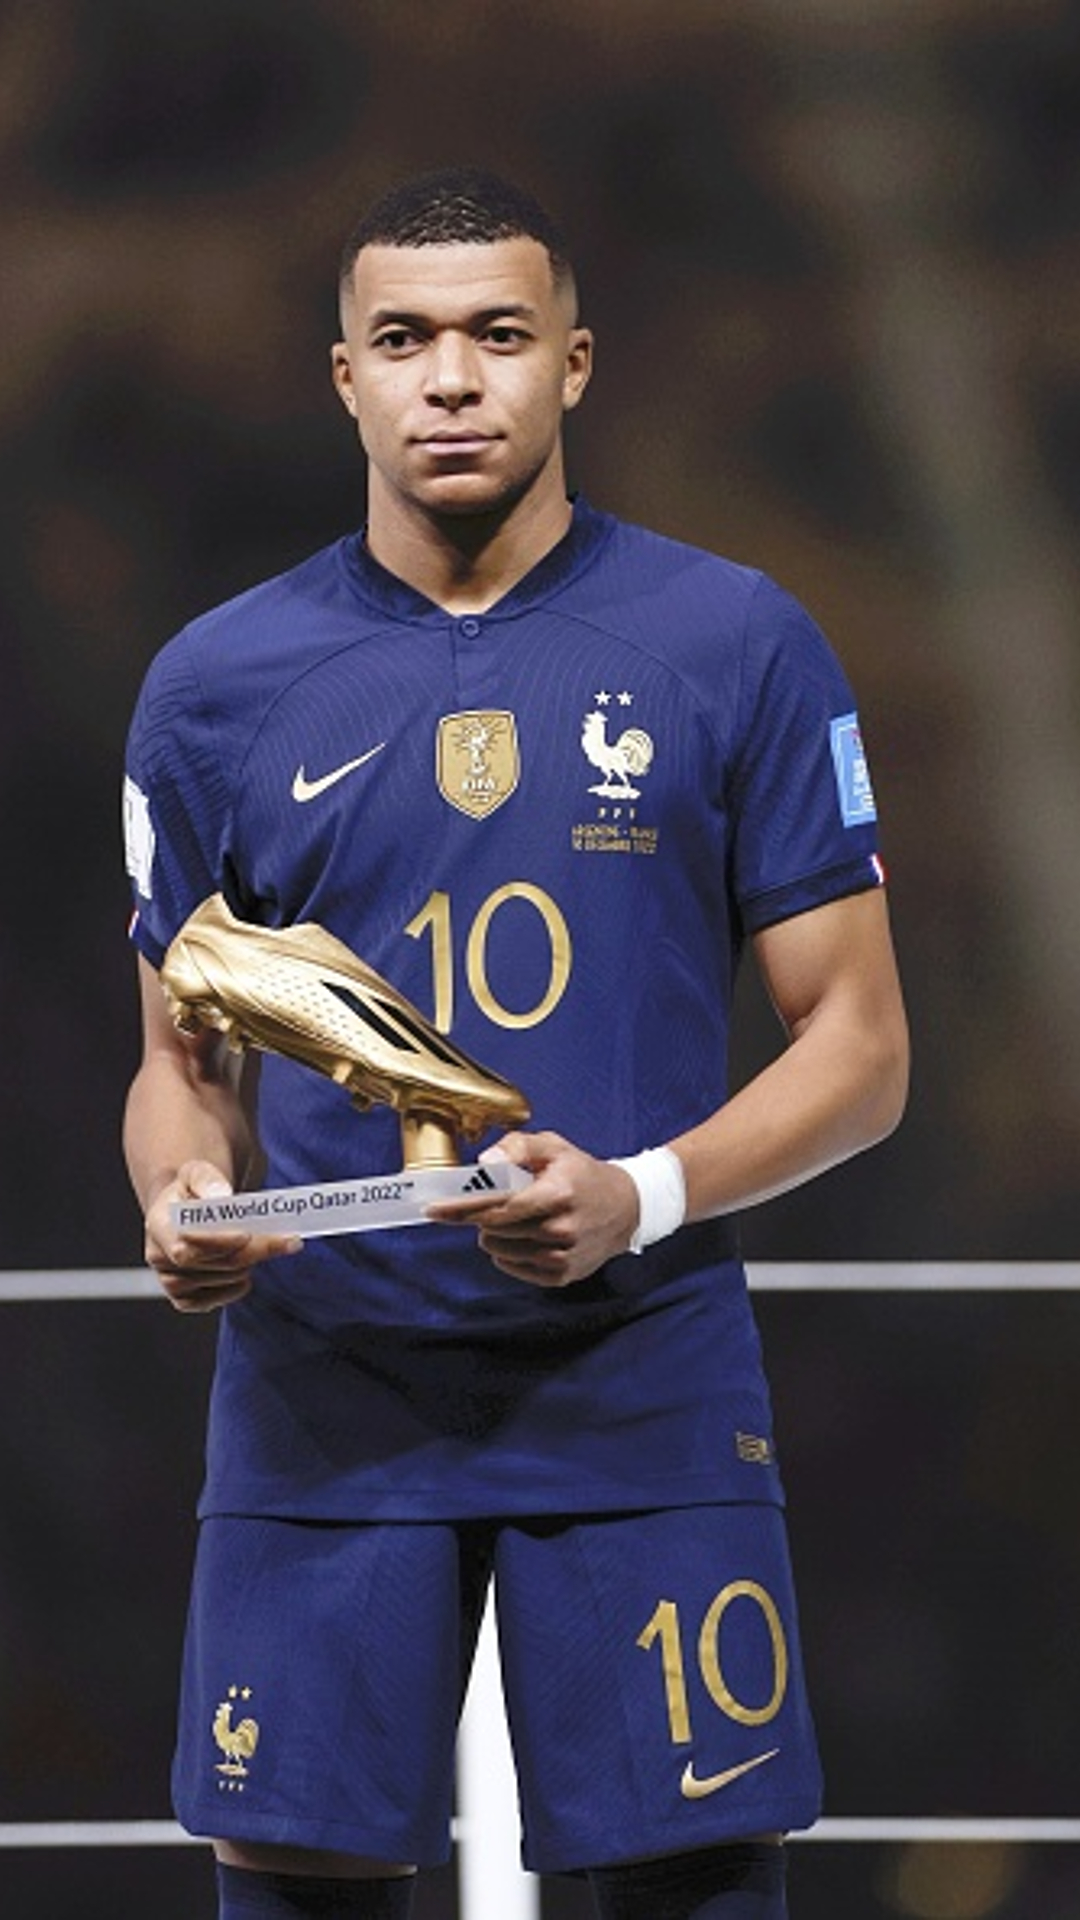 FIFA World Cup 2022 Mbappe secures Golden Boot with 8 goals, Messi settles for Silver Boot with